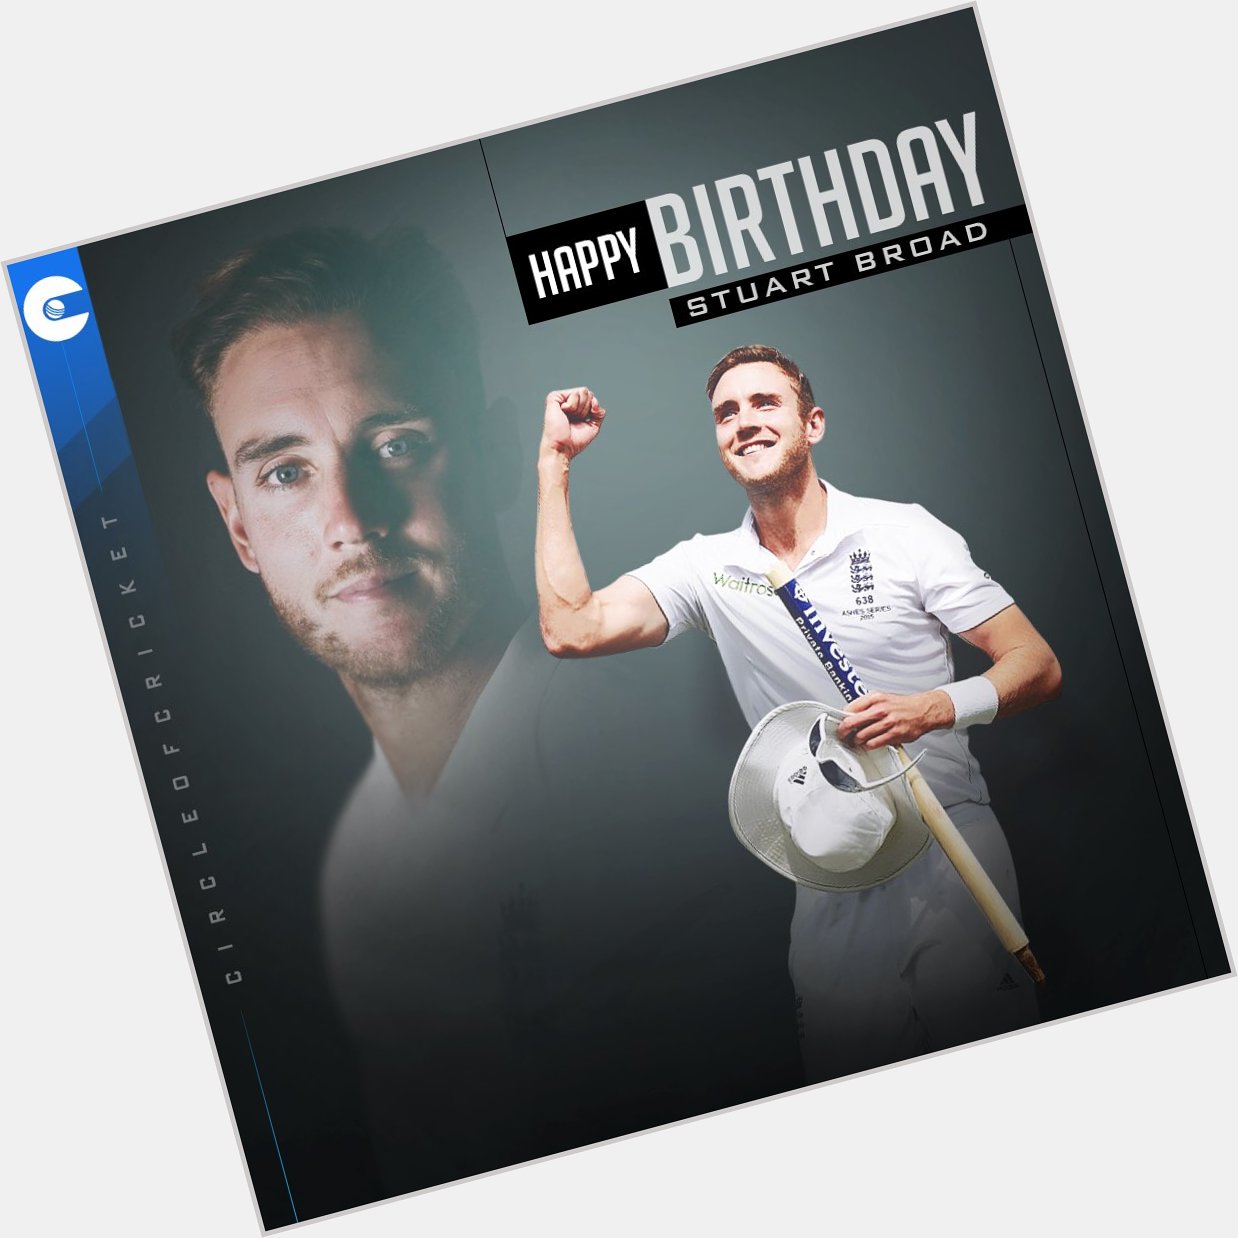 England\s second highest wicket-taker in Test cricket 
Happy Birthday, Stuart Broad 